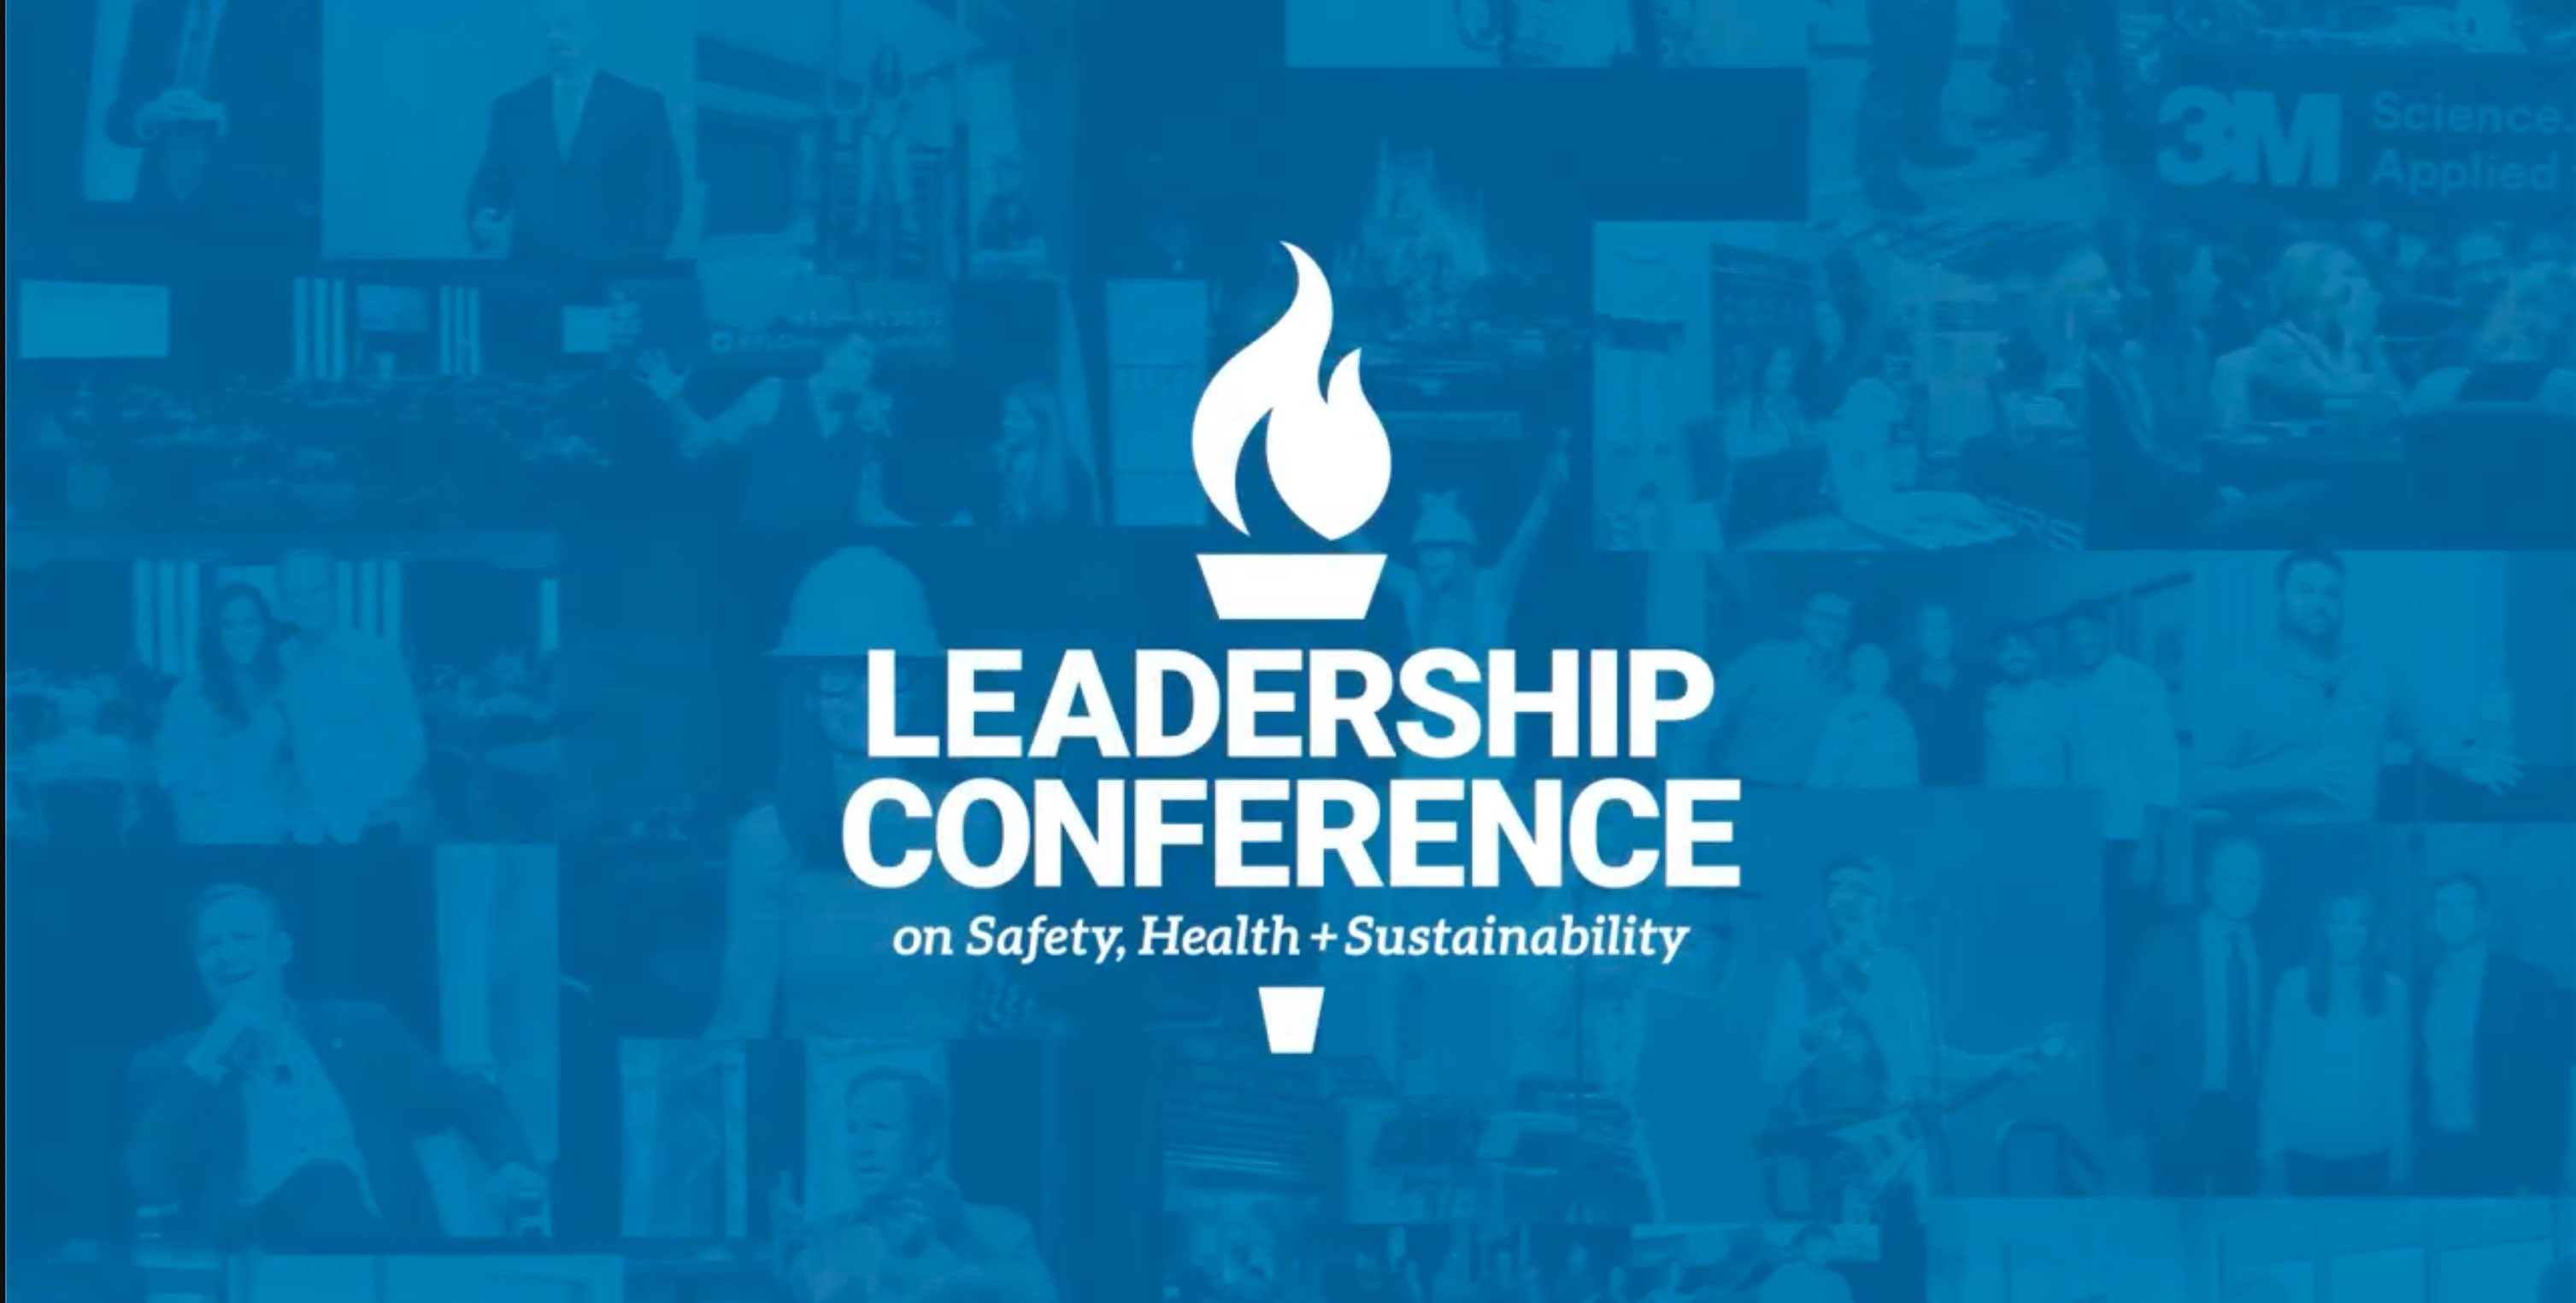 2023 Leadership Conference on Safety, Health + Sustainability picture.